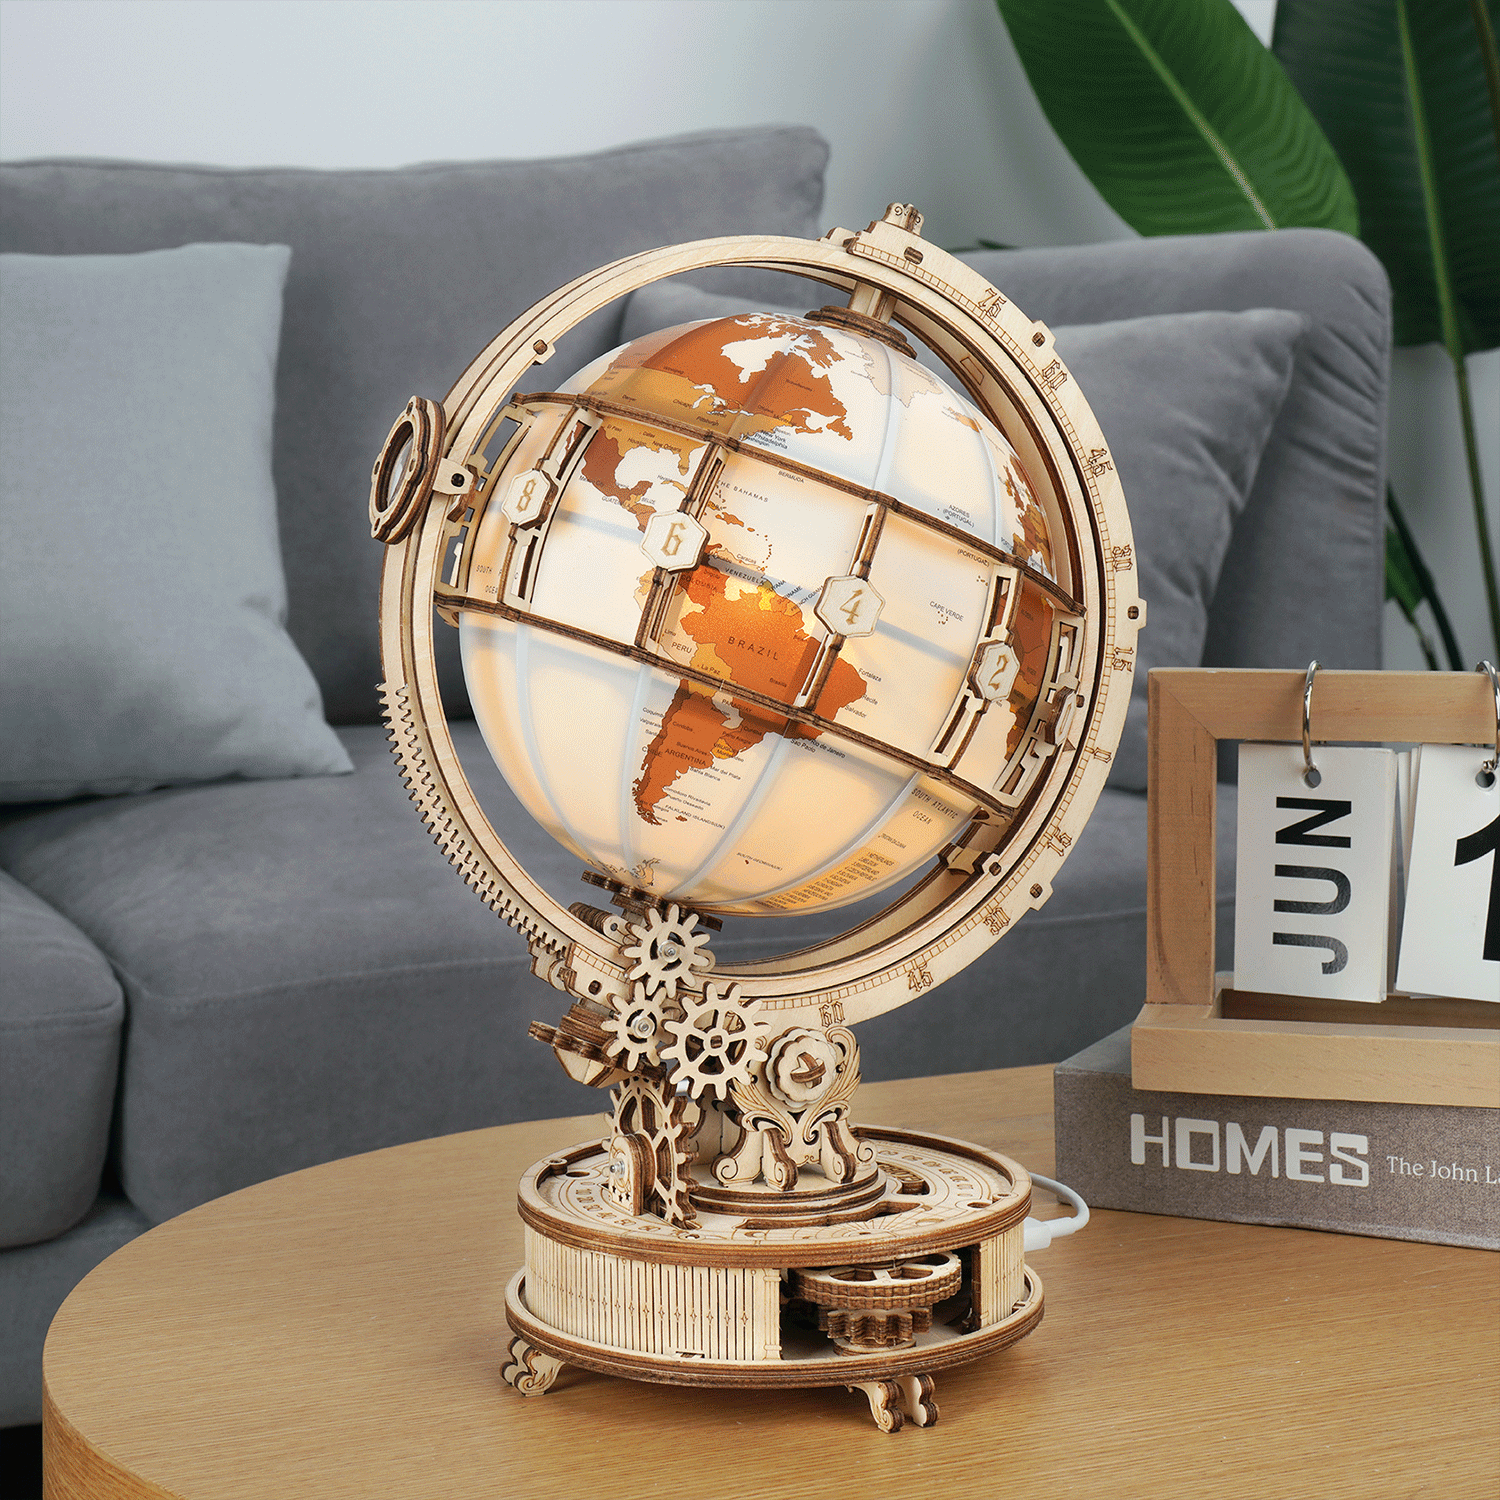  ROKR 3D Wooden Puzzles for Adults Illuminated Globe with Stand  180pcs 3D Puzzles Built-in LED Model Kit Hobby Gifts for Adults/Teens Home  Decor : Toys & Games